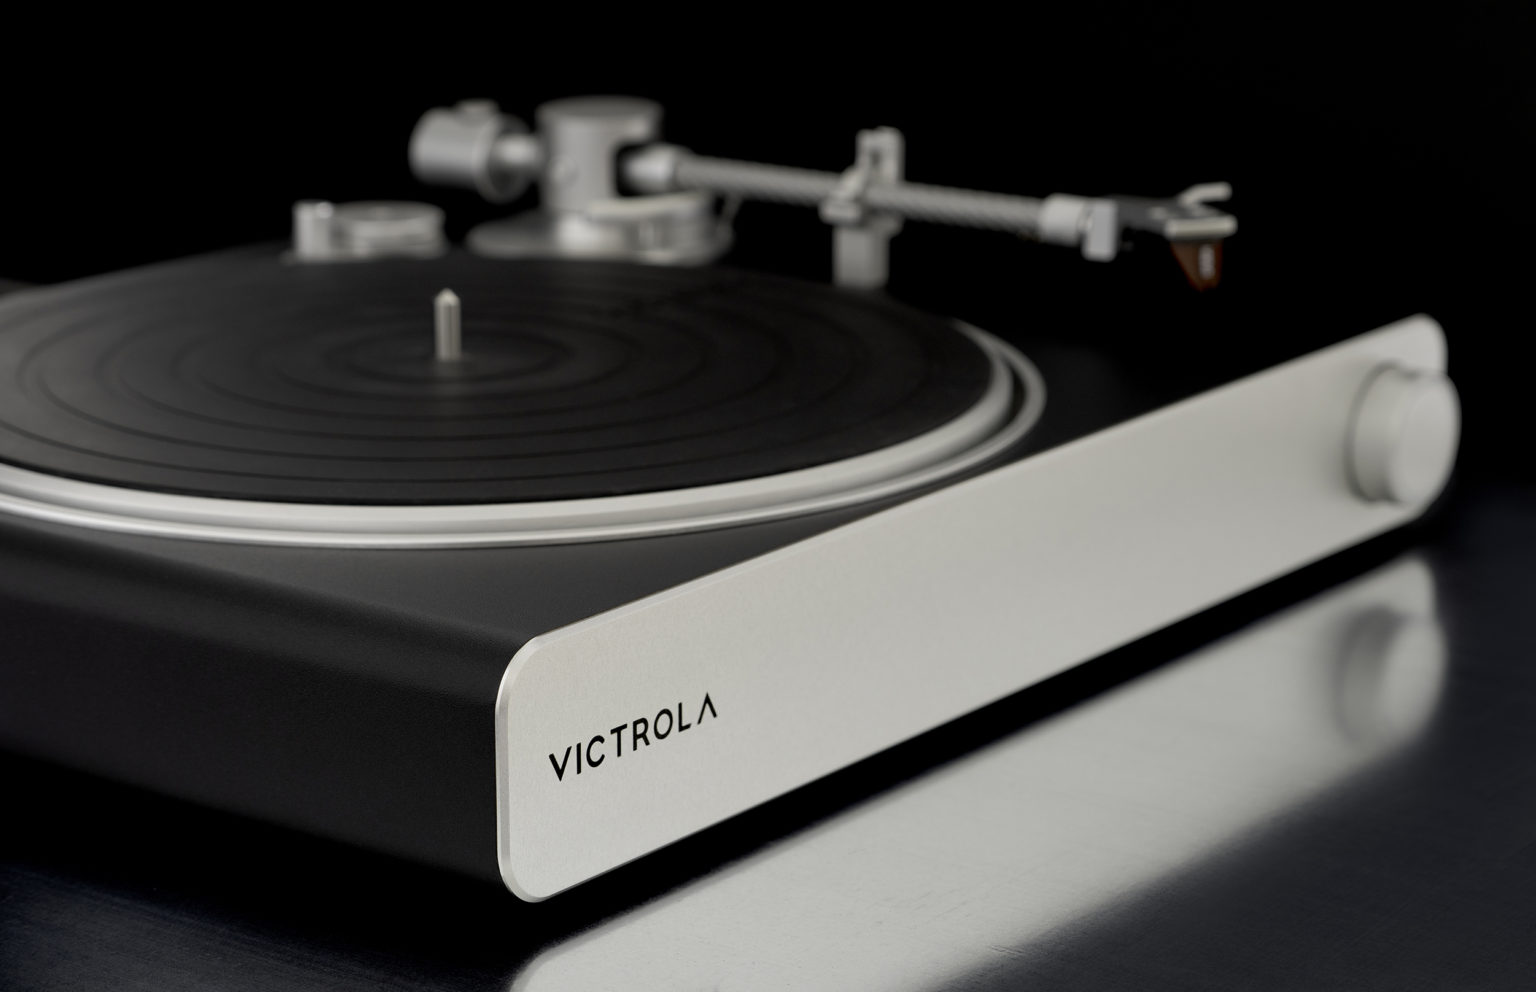 Victrola, In Vendor Partnership With ProSource, Enters CI Market With Sonos-Certified Turntable